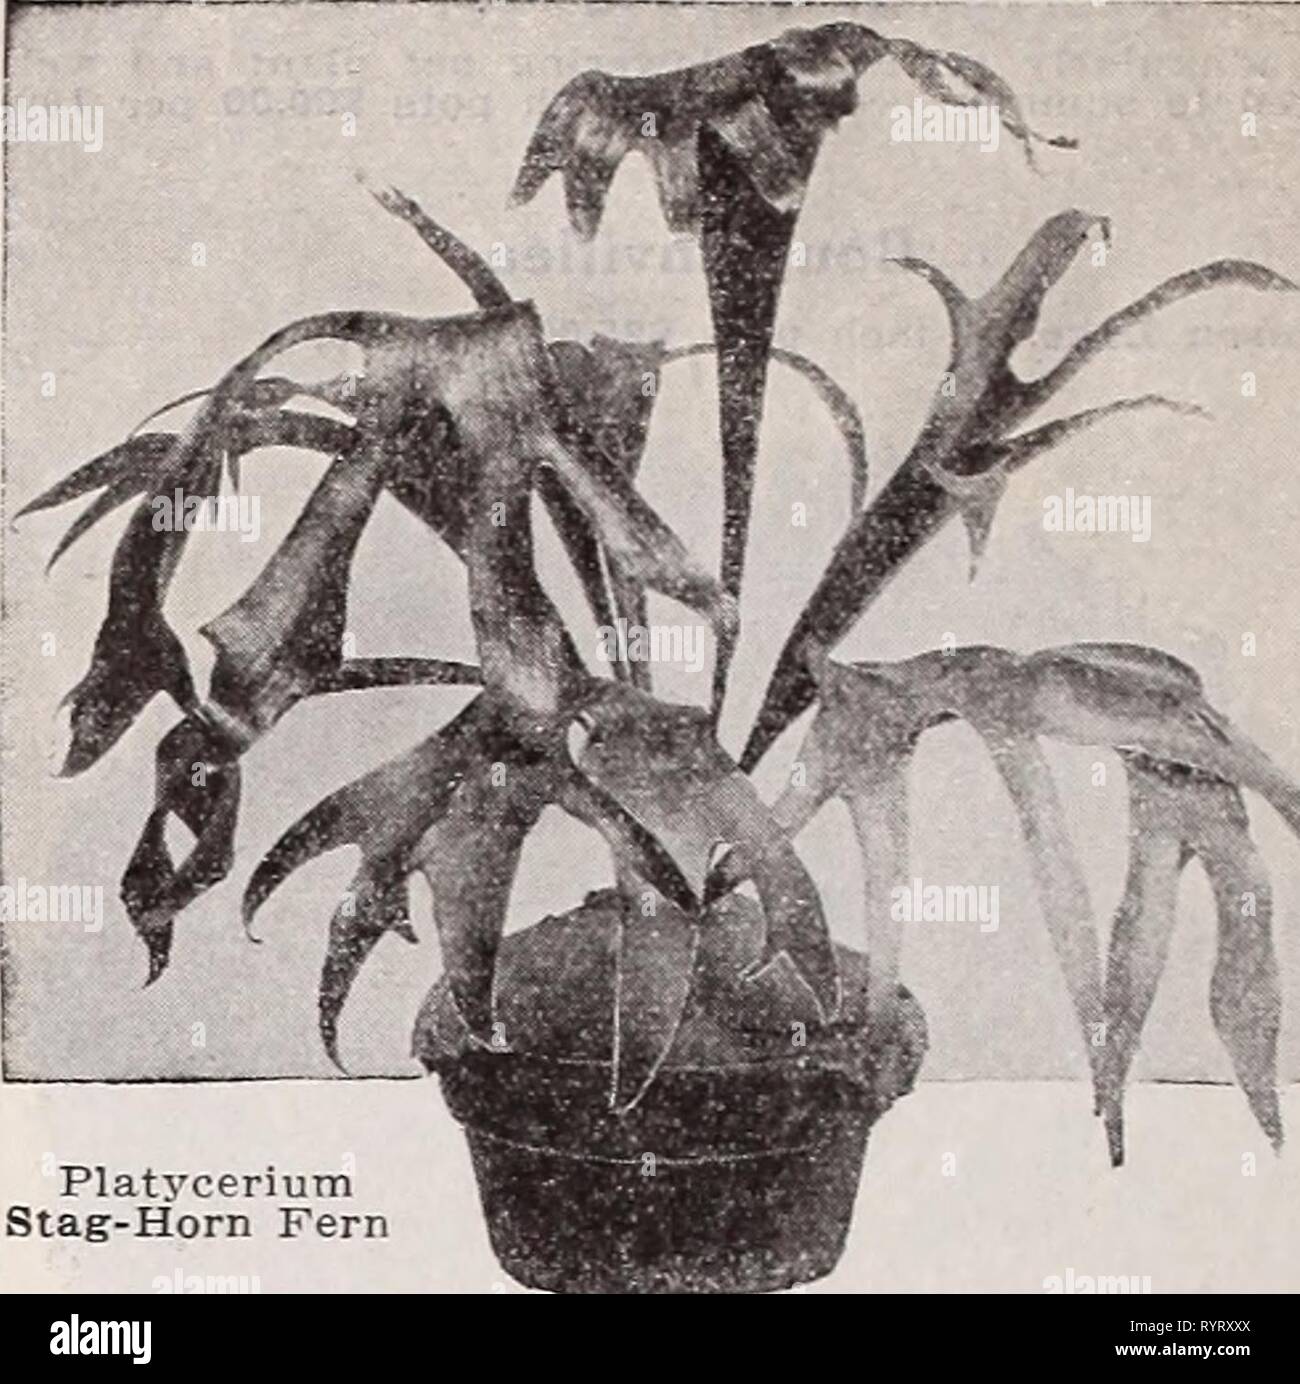 Dreer's wholesale catalog for florists Dreer's wholesale catalog for florists : winter spring summer 1937 . dreerswholesalec1937henr Year: 1937  Asplenium Nidus Avis—Bird's Nest Fern A very interesting and attractive Fern, much In demand because it can be grown successfully in the home. We offer a splendid, healthy, clean lot of plants. 214-inch pots $20.00 per 100; 3-inch pots $35.00 per 100; 31,2-inch pots $45.00 per 100; 6-inch pots $1.00 each. Cibotium Schiedei—Mexican Tree Fern One of the most desirable and most valuable Ferns for room and window decoration. Grows to considerable size and Stock Photo